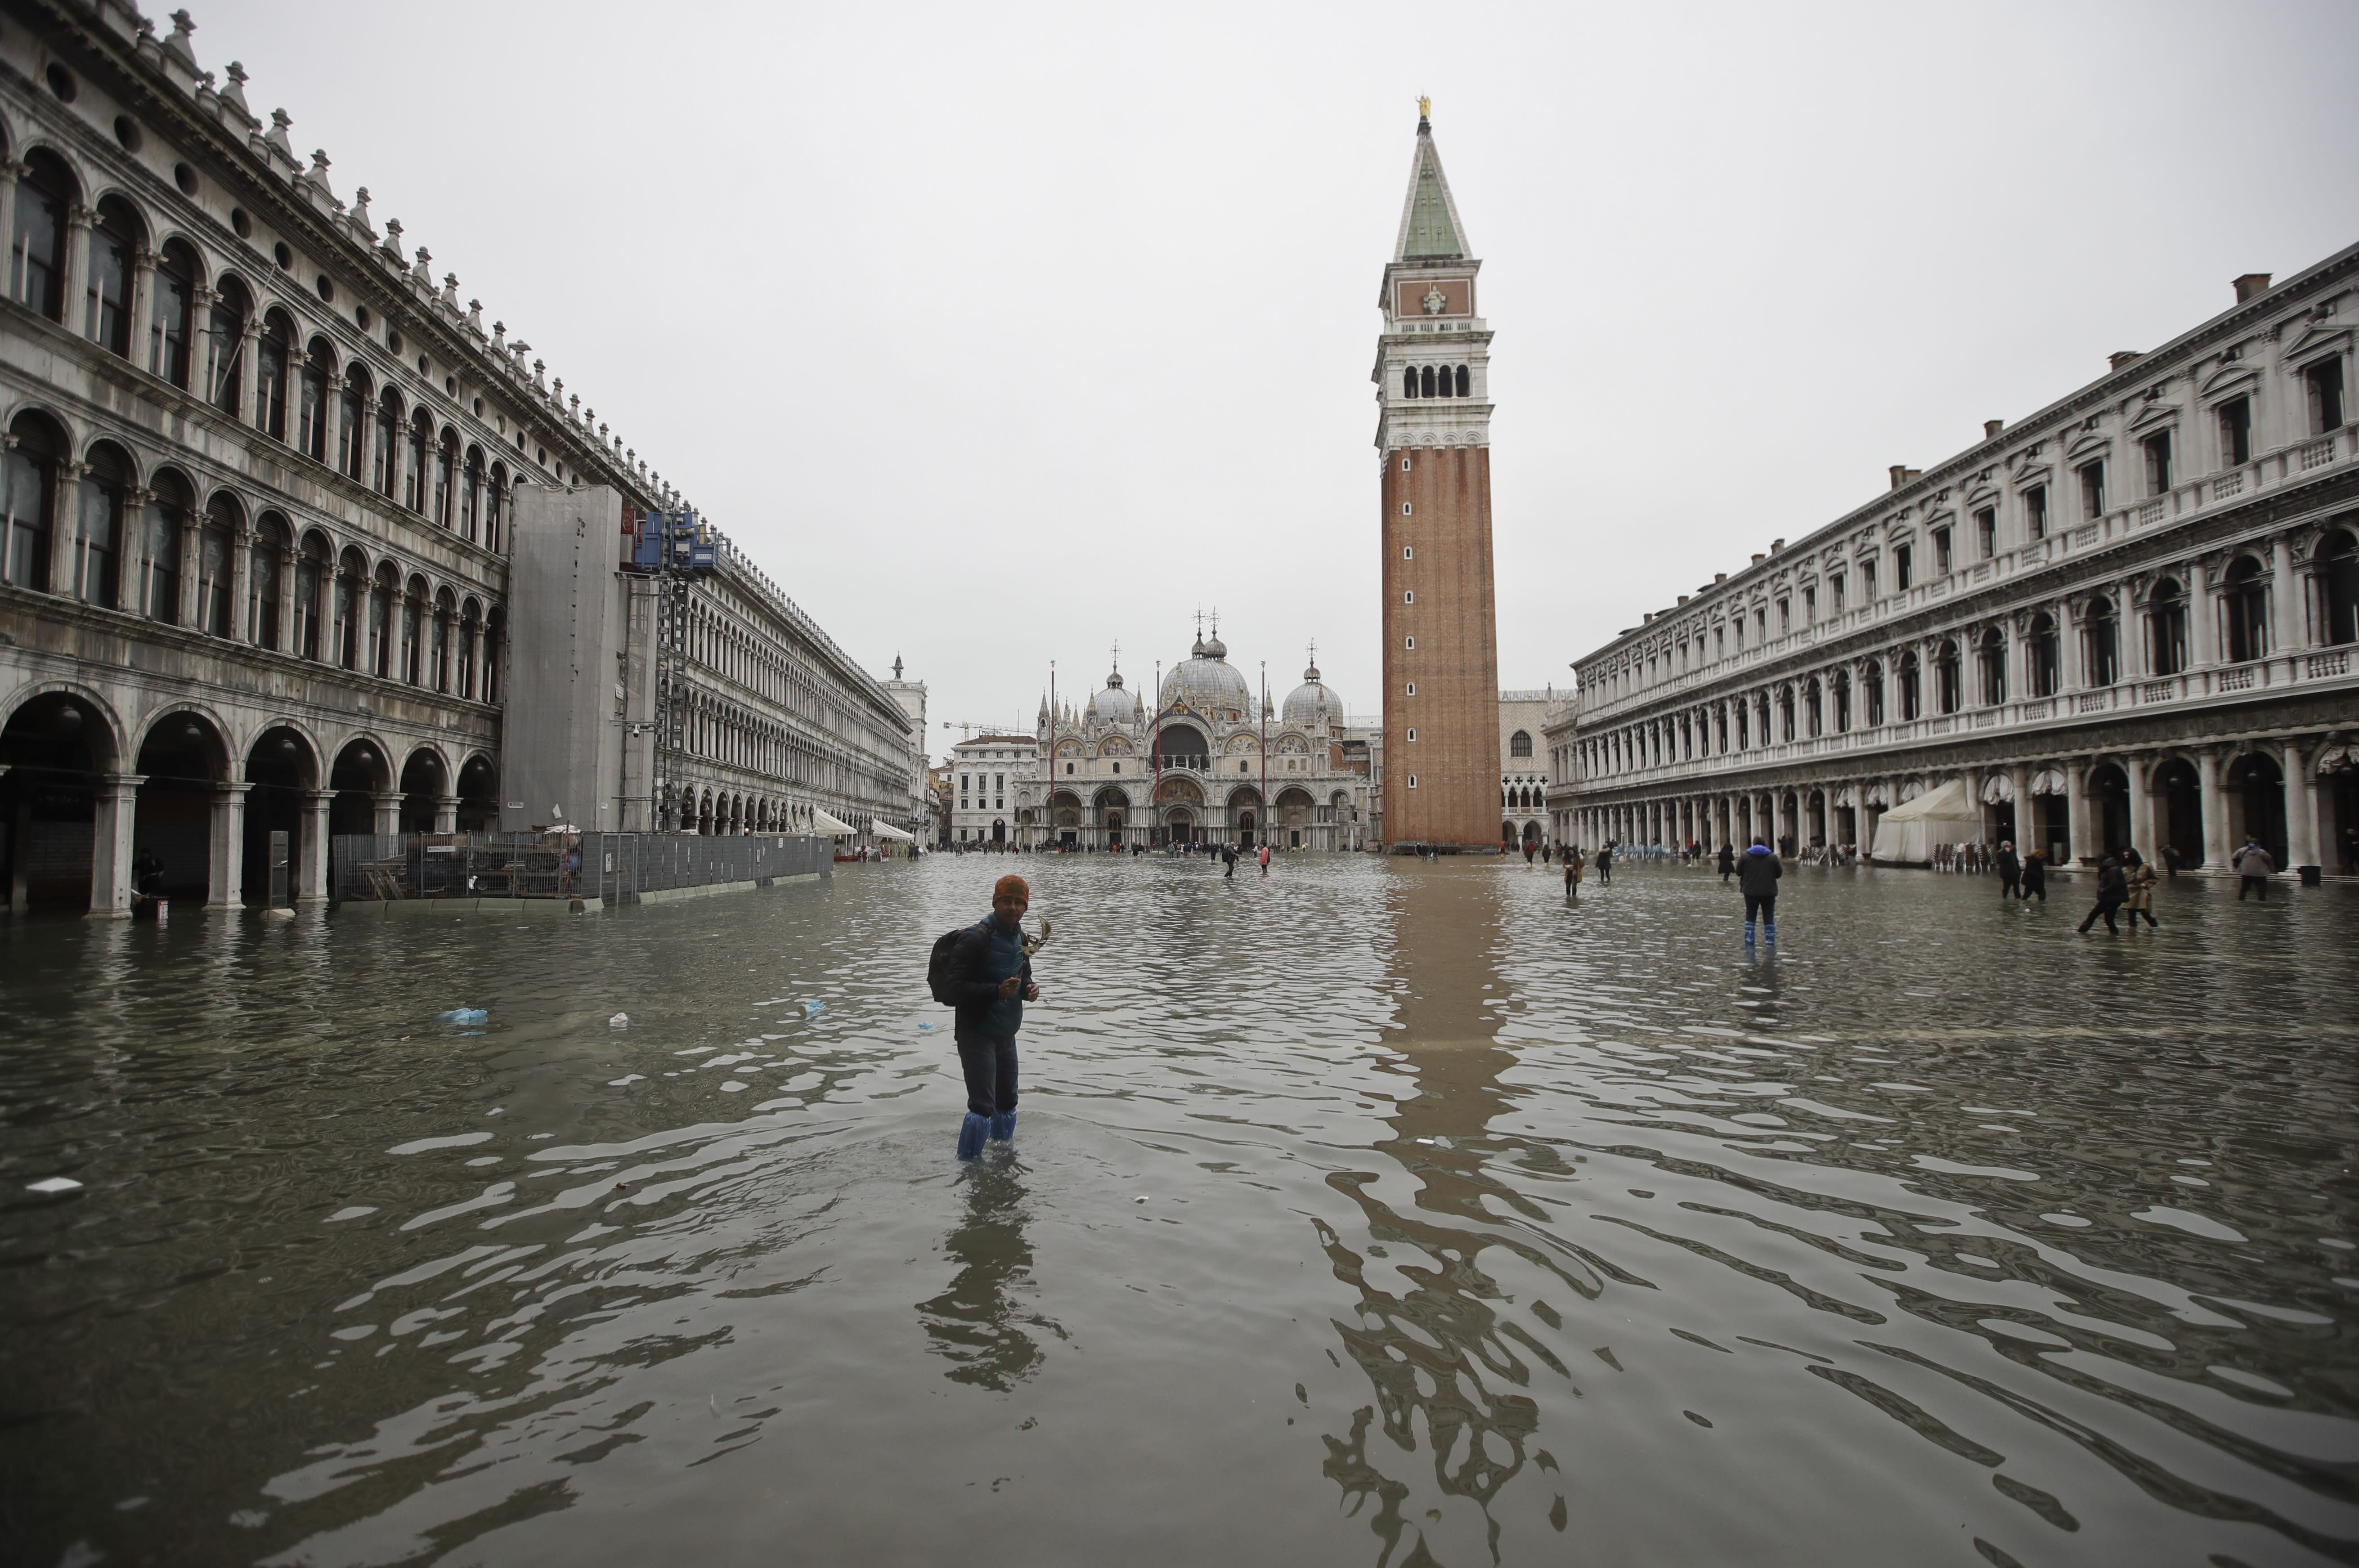 Venice ‘on its knees’ after secondworst flood ever recorded